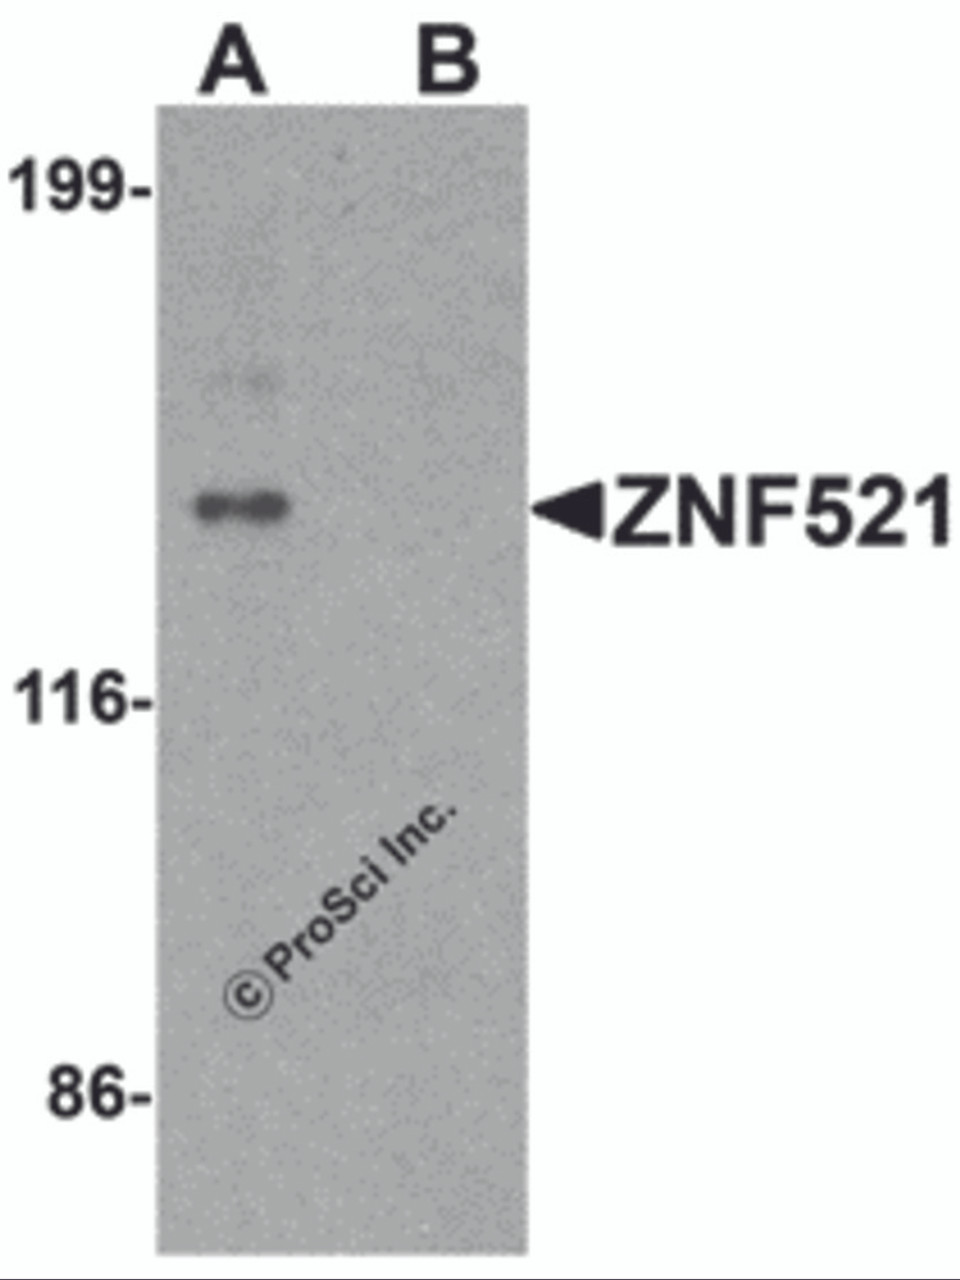 Western blot analysis of ZNF521 in HeLa cell lysate with ZNF521 antibody at 1 &#956;g/ml in (A) the absence and (B) the presence of blocking peptide.